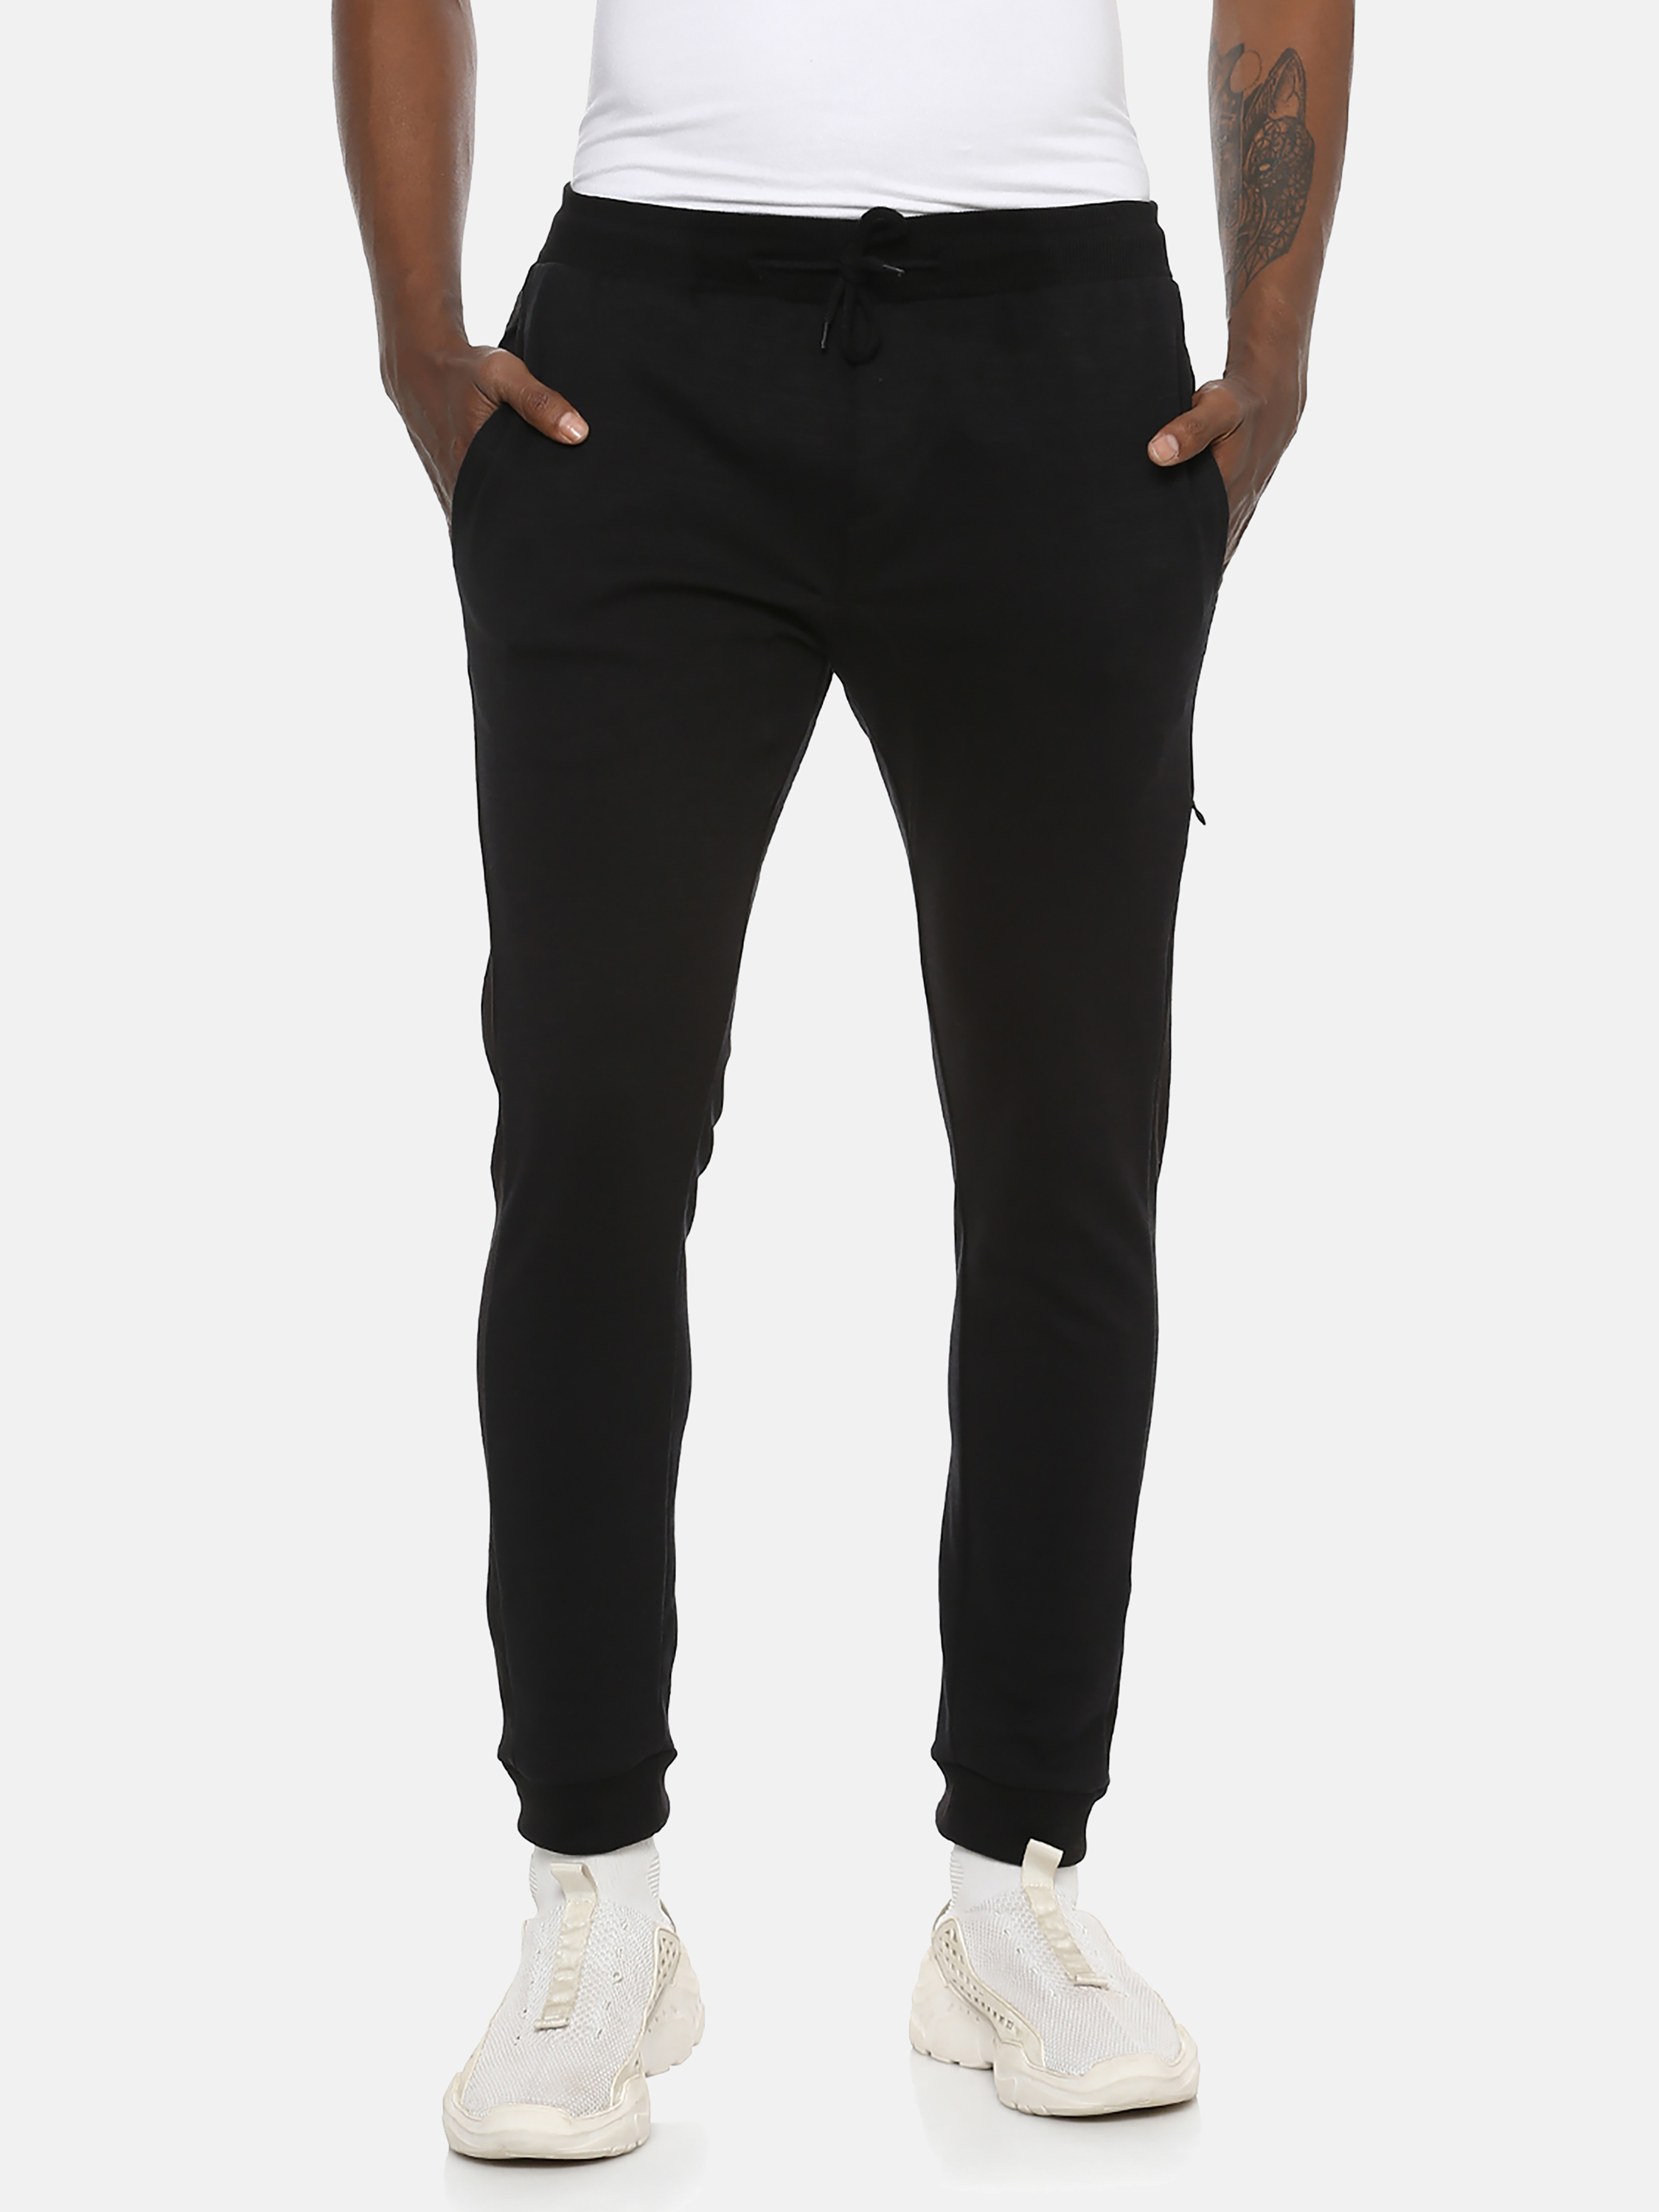 Campus Sutra Men Solid Stylish Casual & Evevning Trackpant.